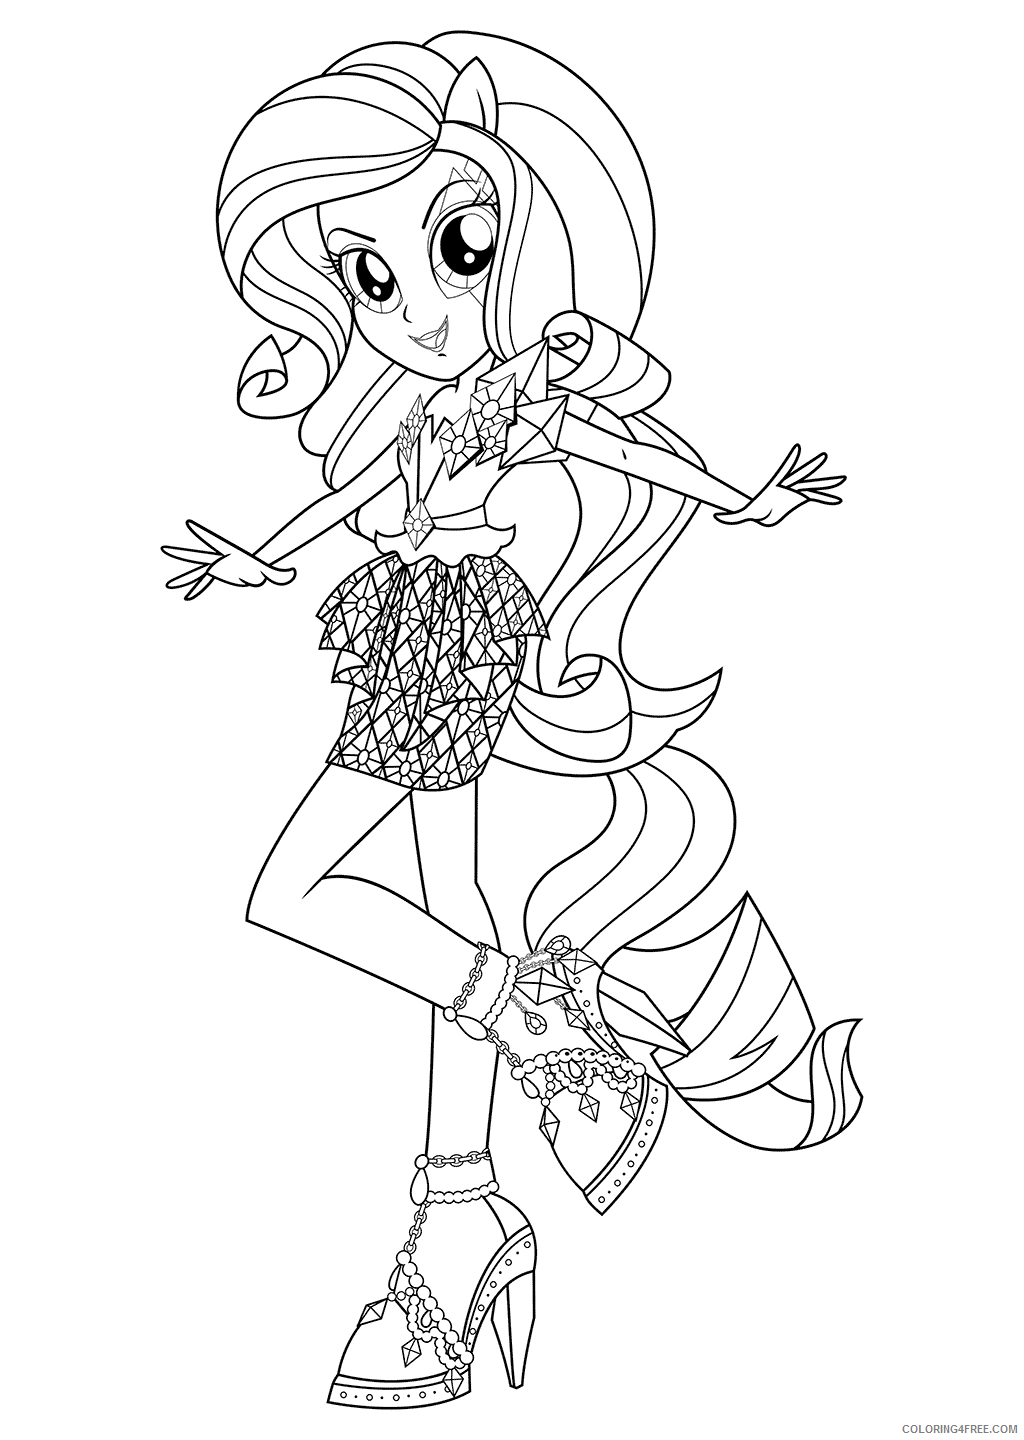 My Little Pony Equestria Girls Coloring Pages Cartoons Rarity Equestria Girls Printable 2020 4617 Coloring4free